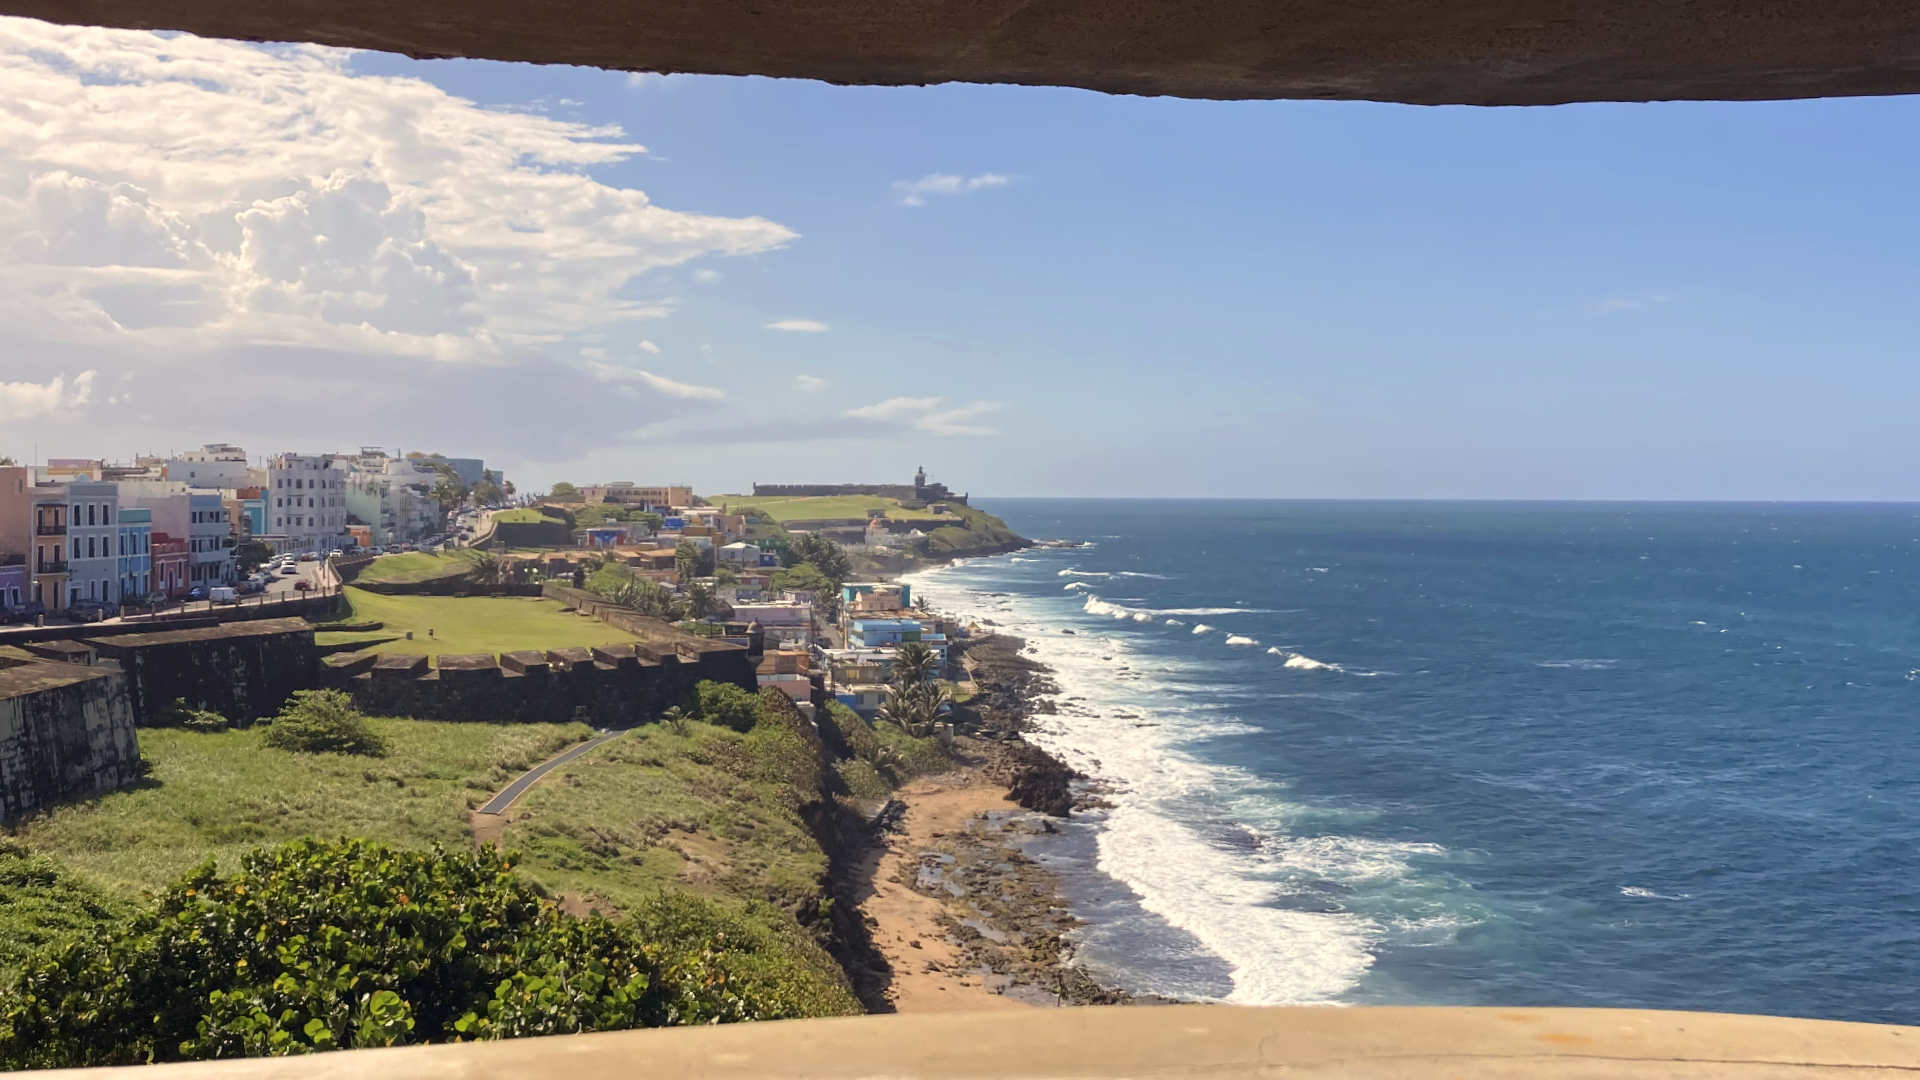 The northern coast of Puerto Rico at the capital, San Juan, protected by fortifications.